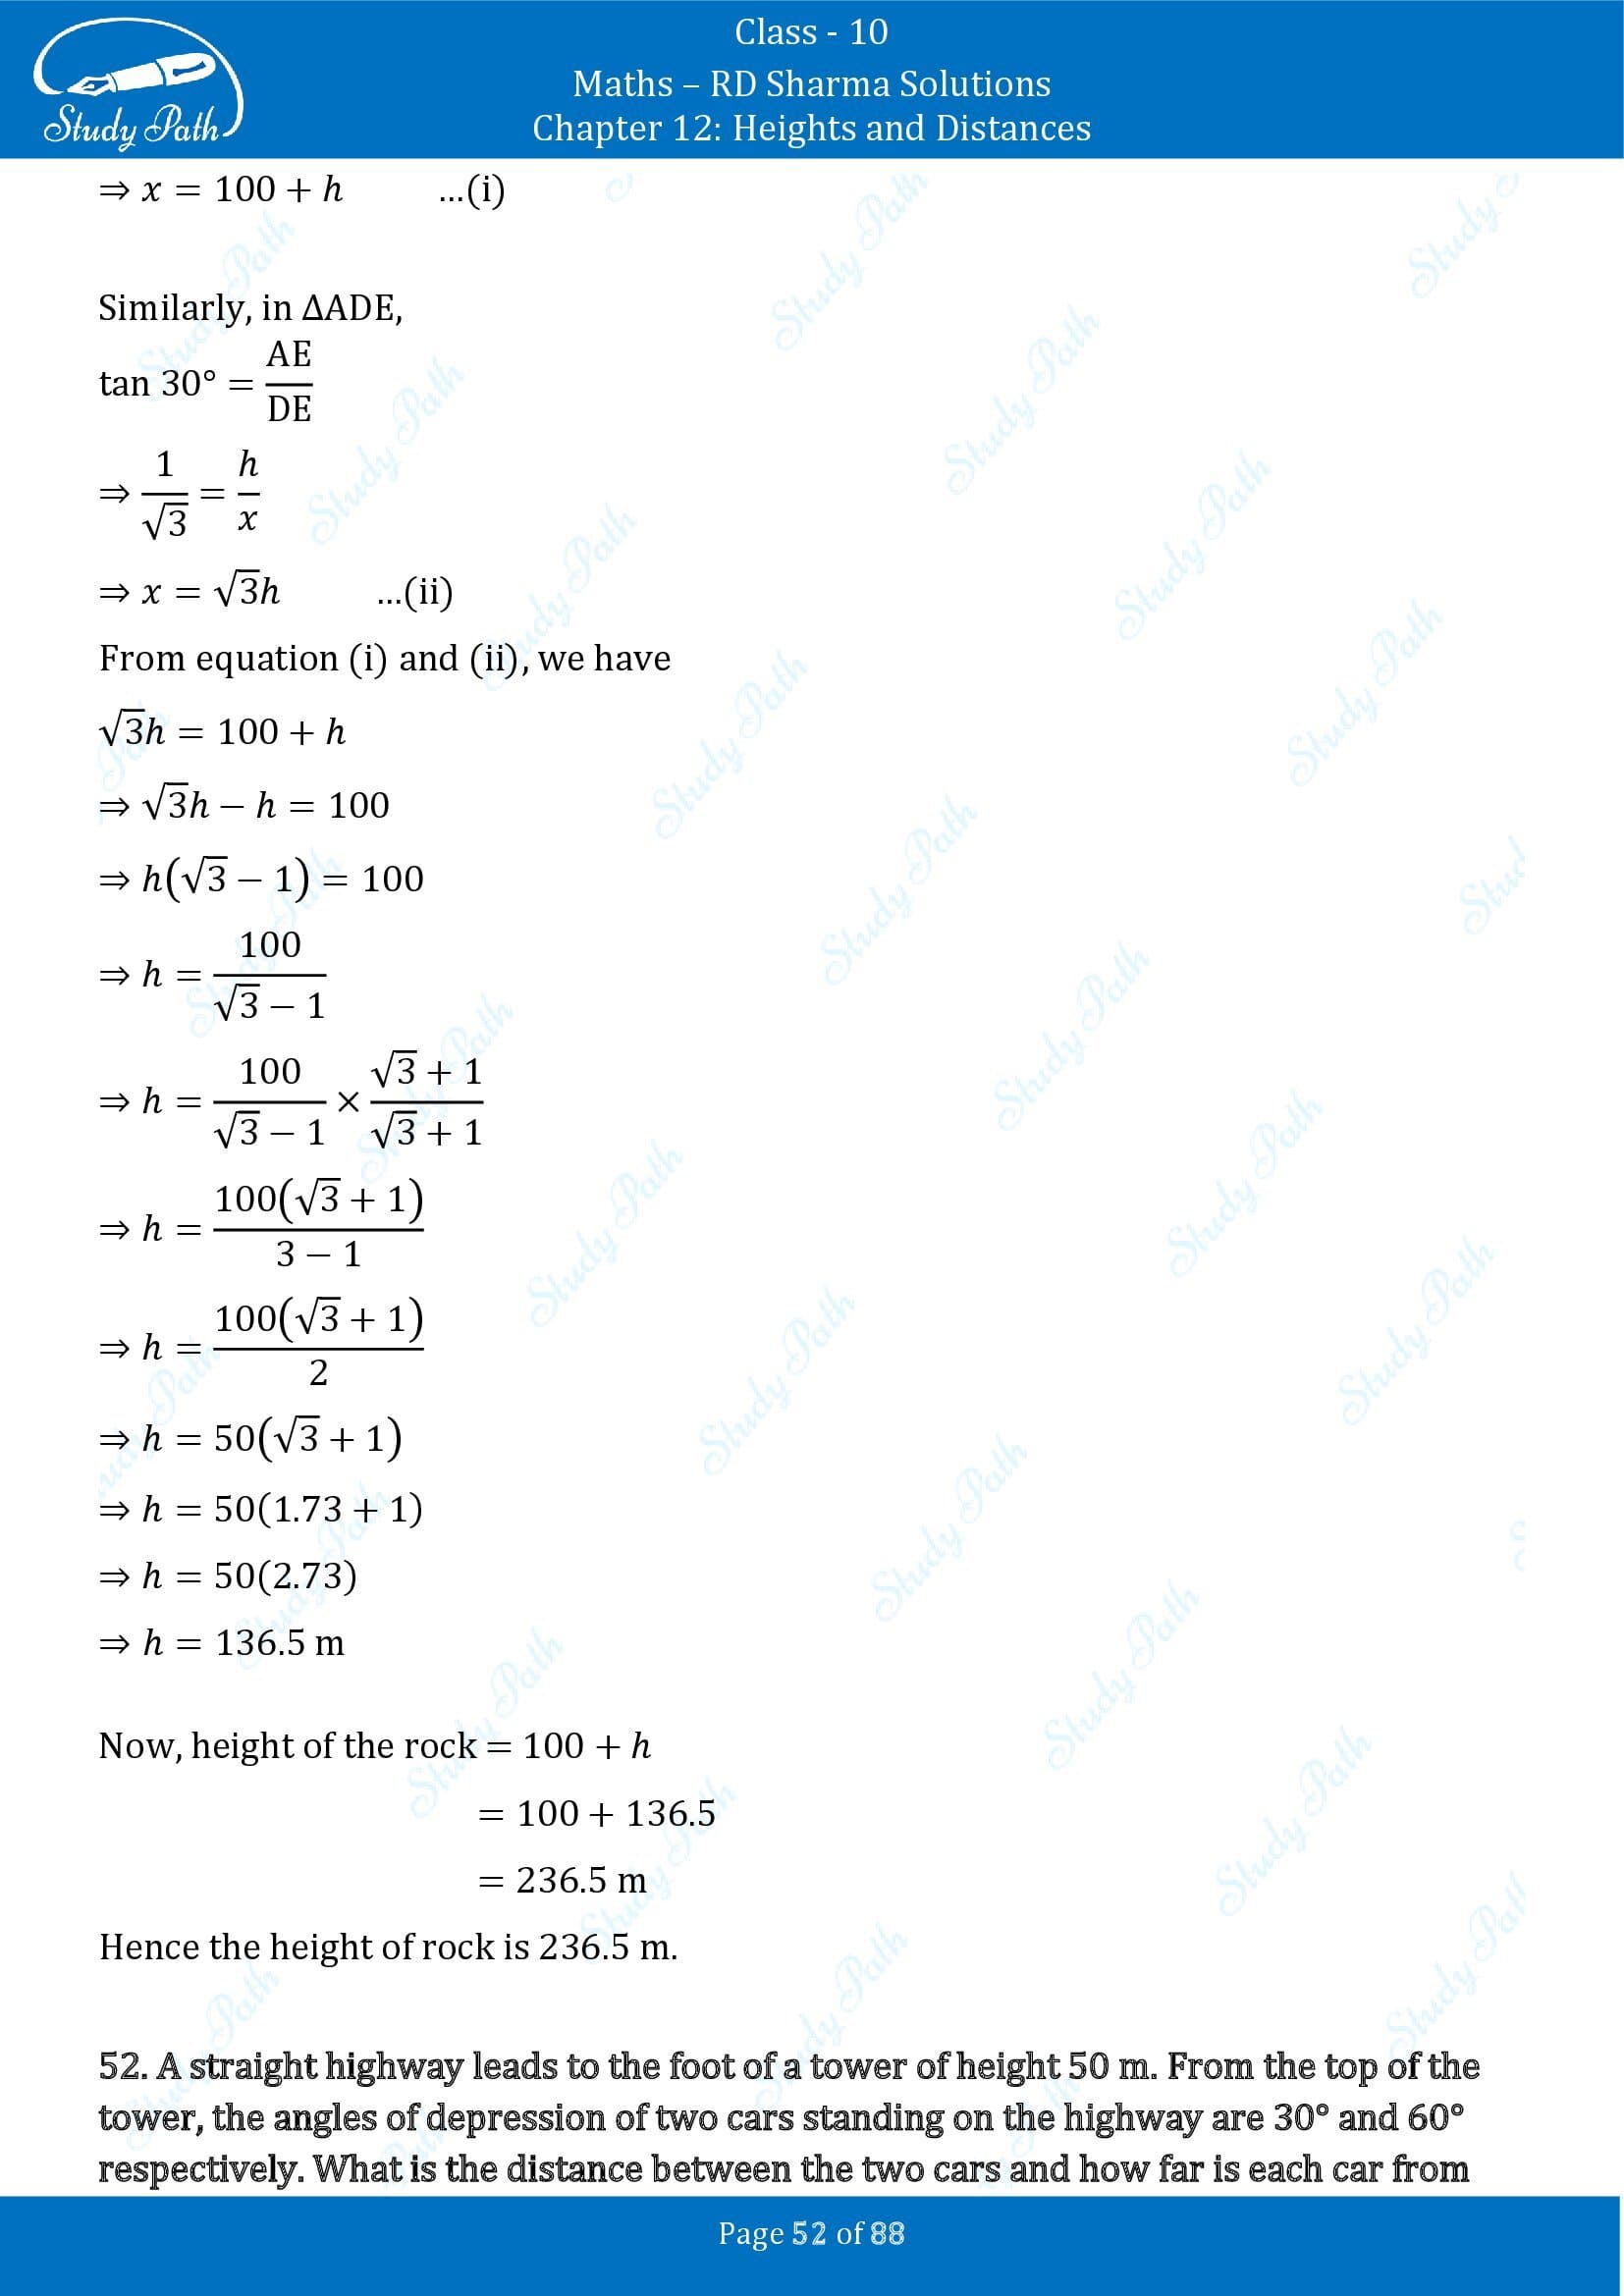 RD Sharma Solutions Class 10 Chapter 12 Heights and Distances Exercise 12.1 00052